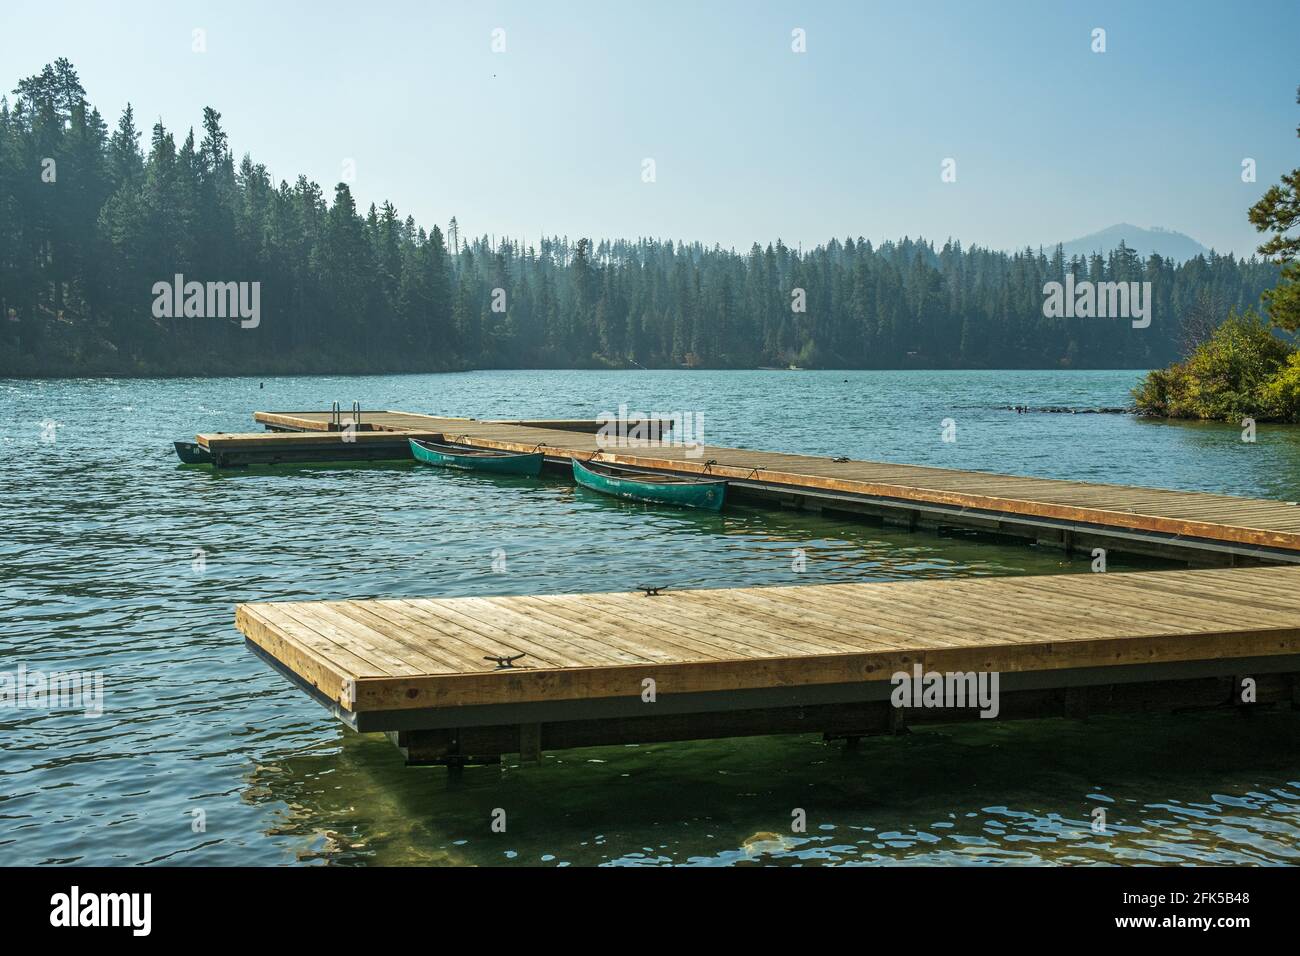 Pier on the scenic Suttle Lake in Oregon, USA Stock Photo